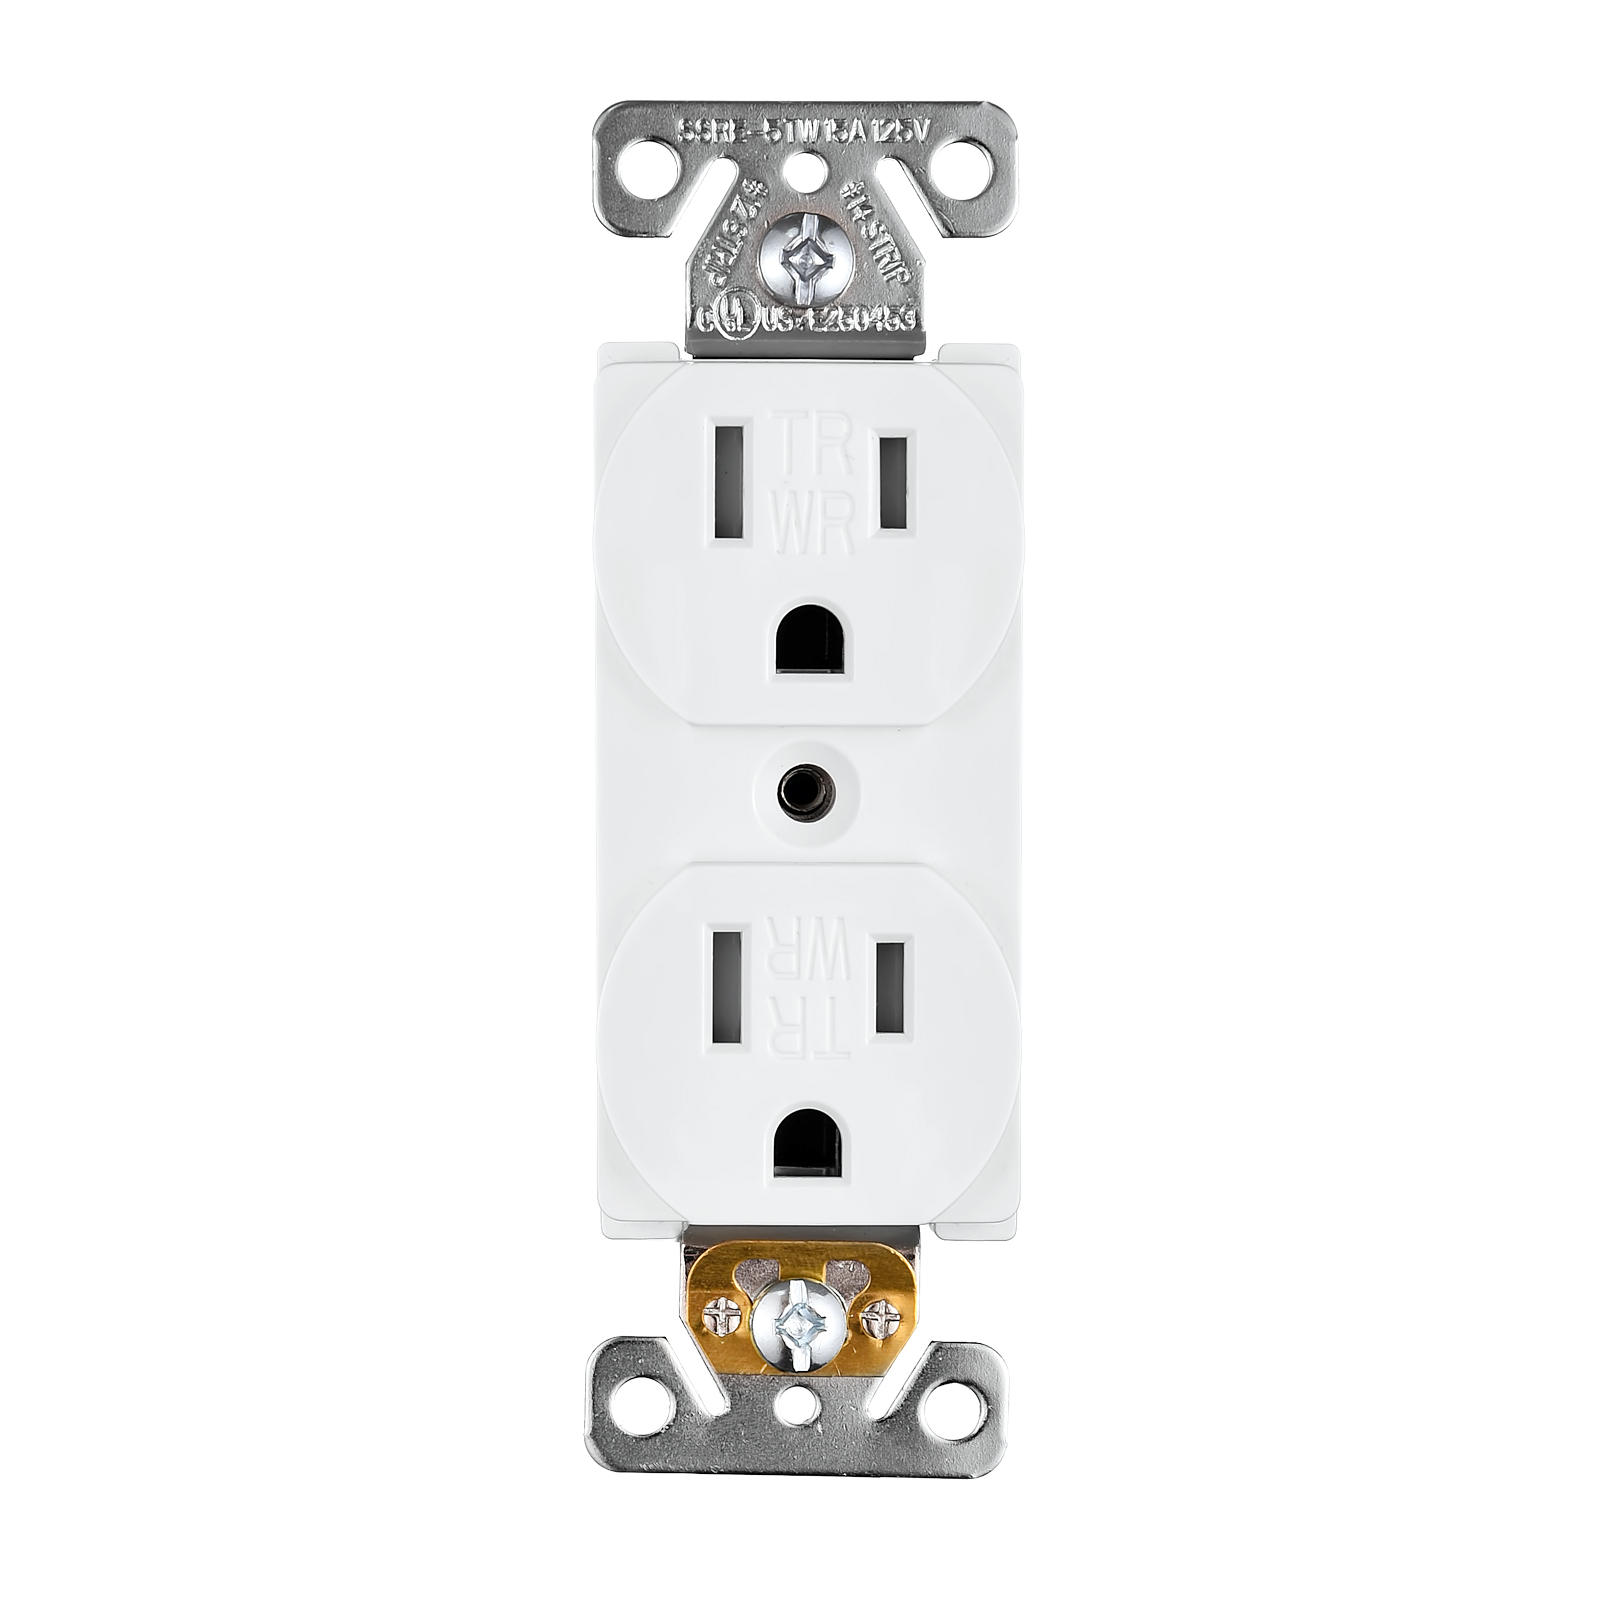 UL Listed 15 Amp Residential Grade Standard Wall Outlet , Child Proof Weather Resistant Duplex Receptacle, SSRE-2